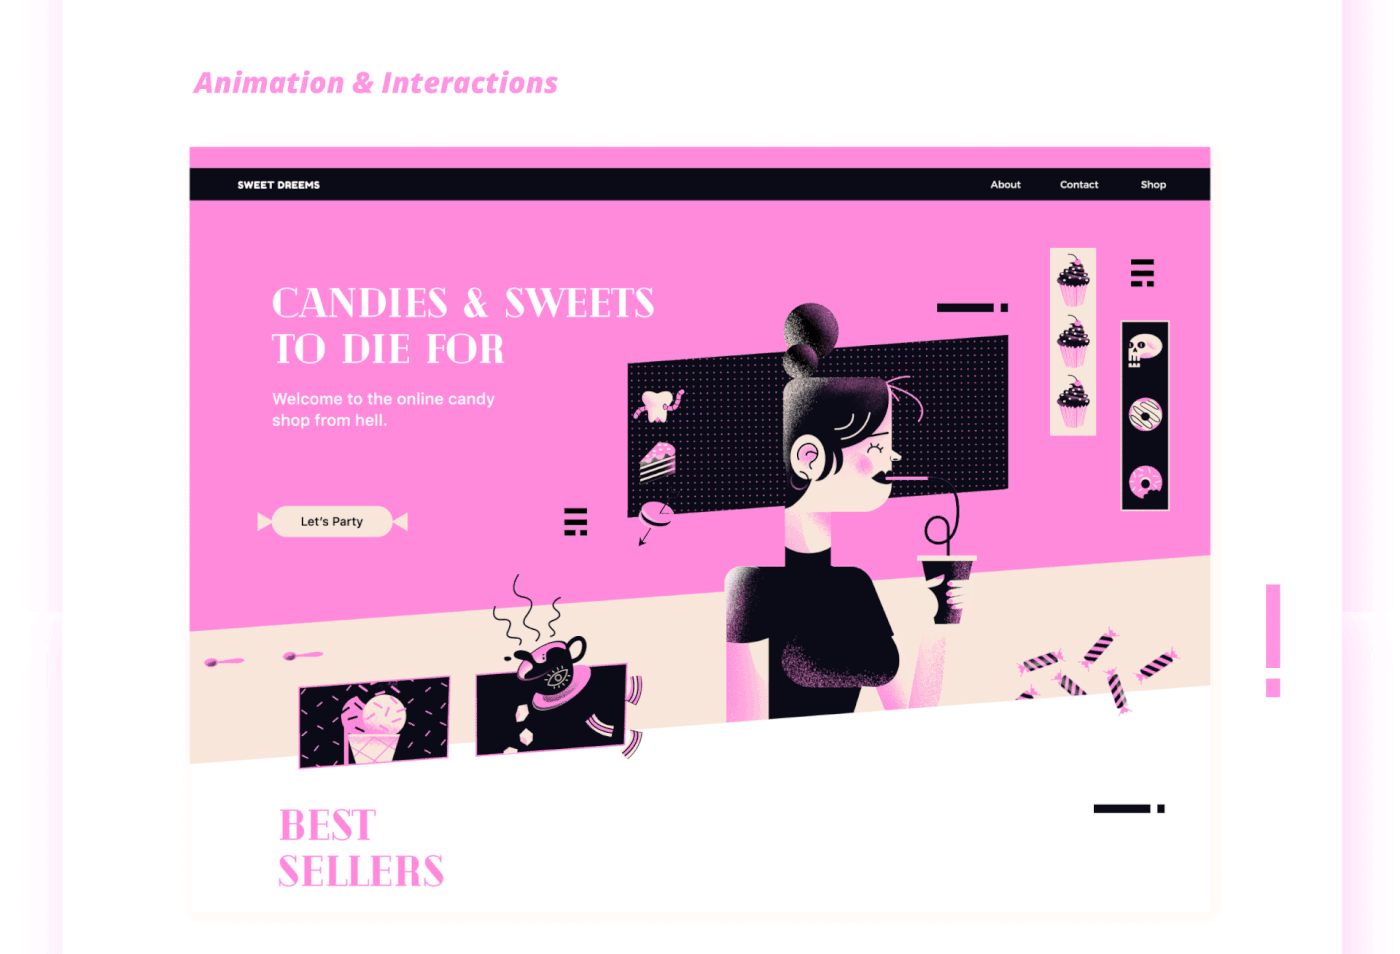 branding  Web Design  animation  interaction Candy sweet UX UI shop Playful cool